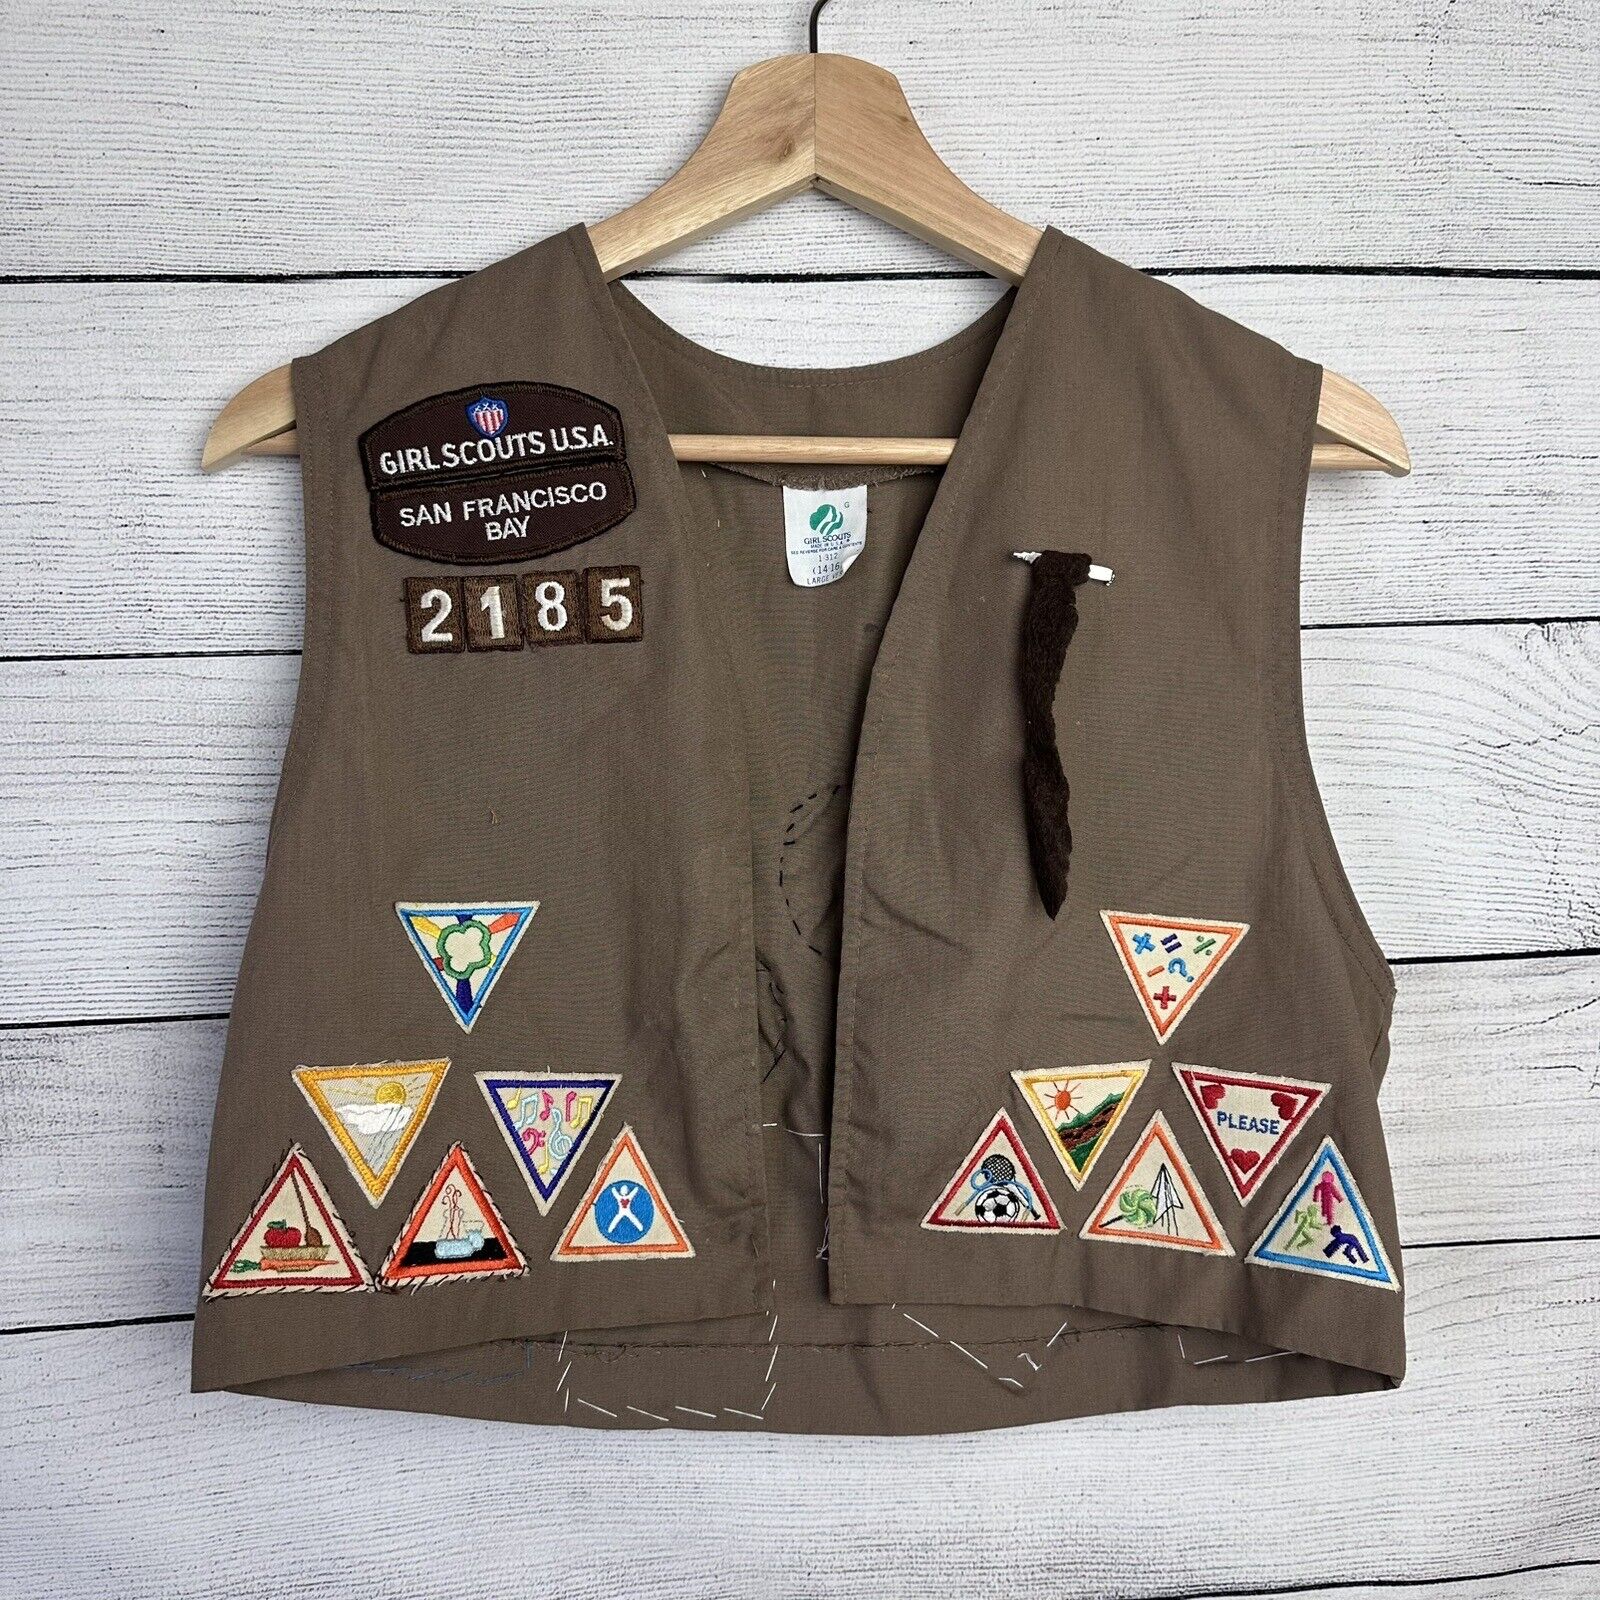 Vintage 90s Girl Scouts Brownie Vest w/ Patches 92’-94’ Size Large 14/16